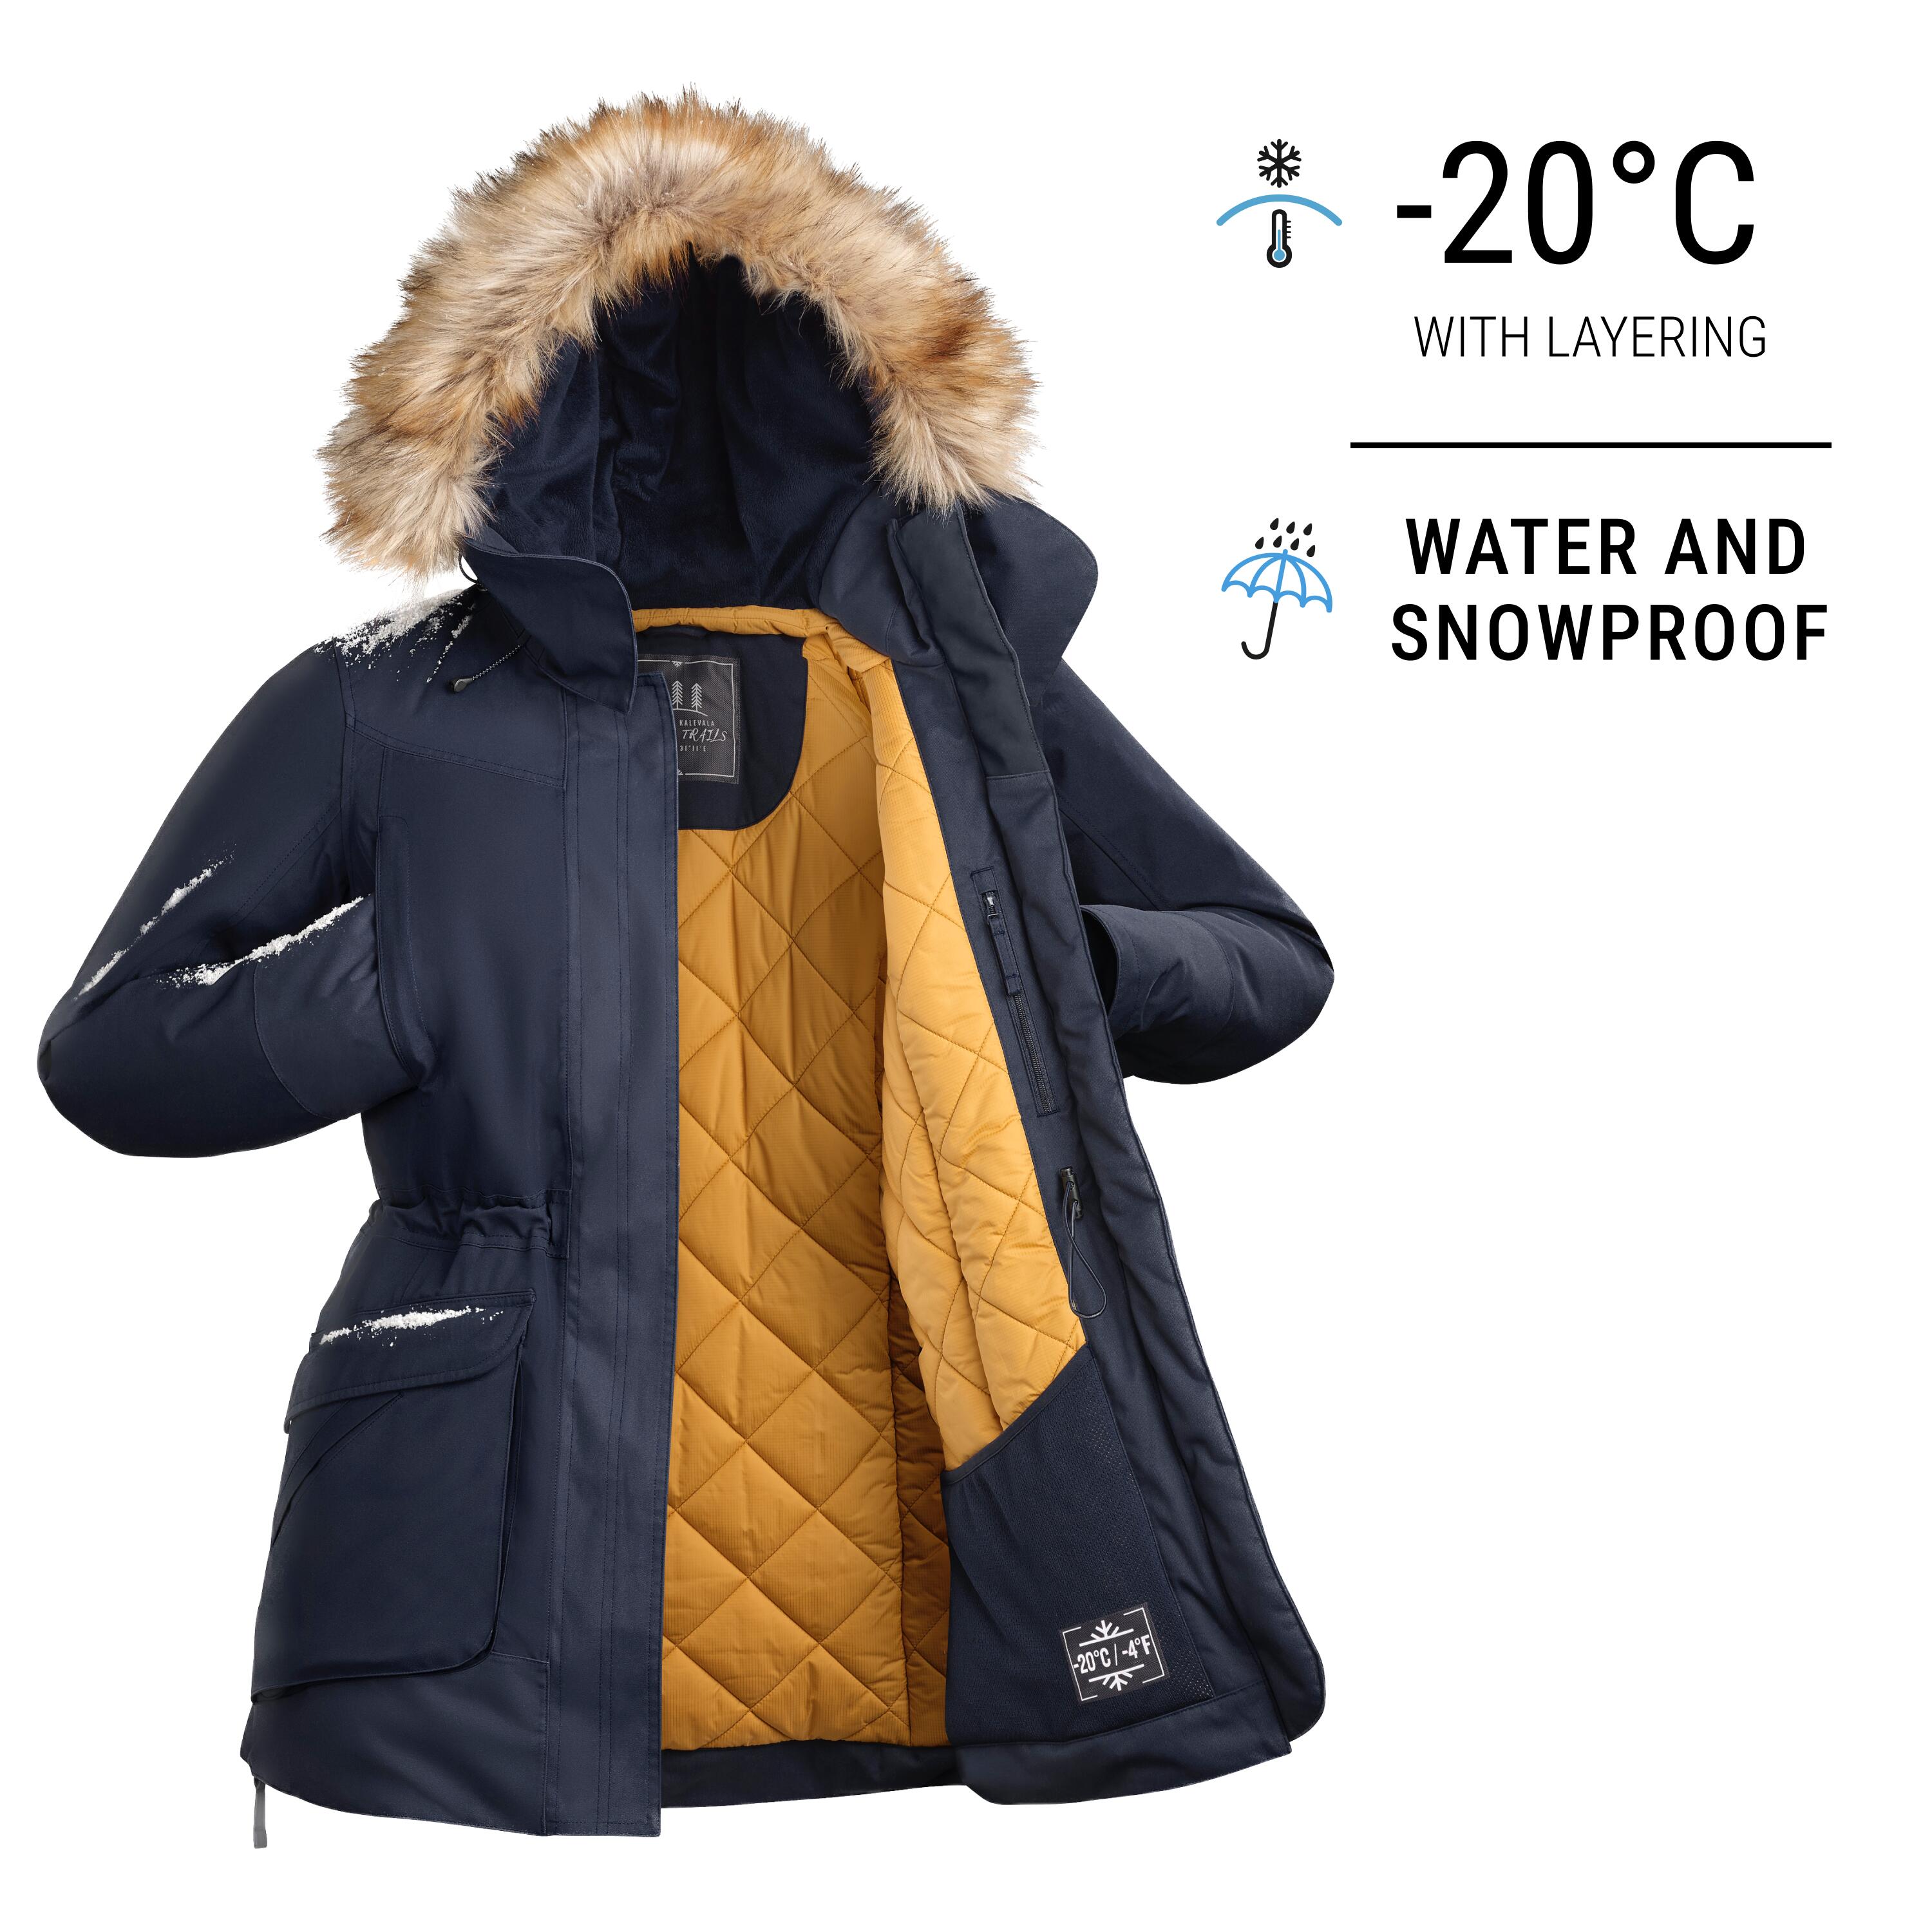 Buy Joules Wiltshire Waterproof Parka Coat With Hood from the Joules online  shop